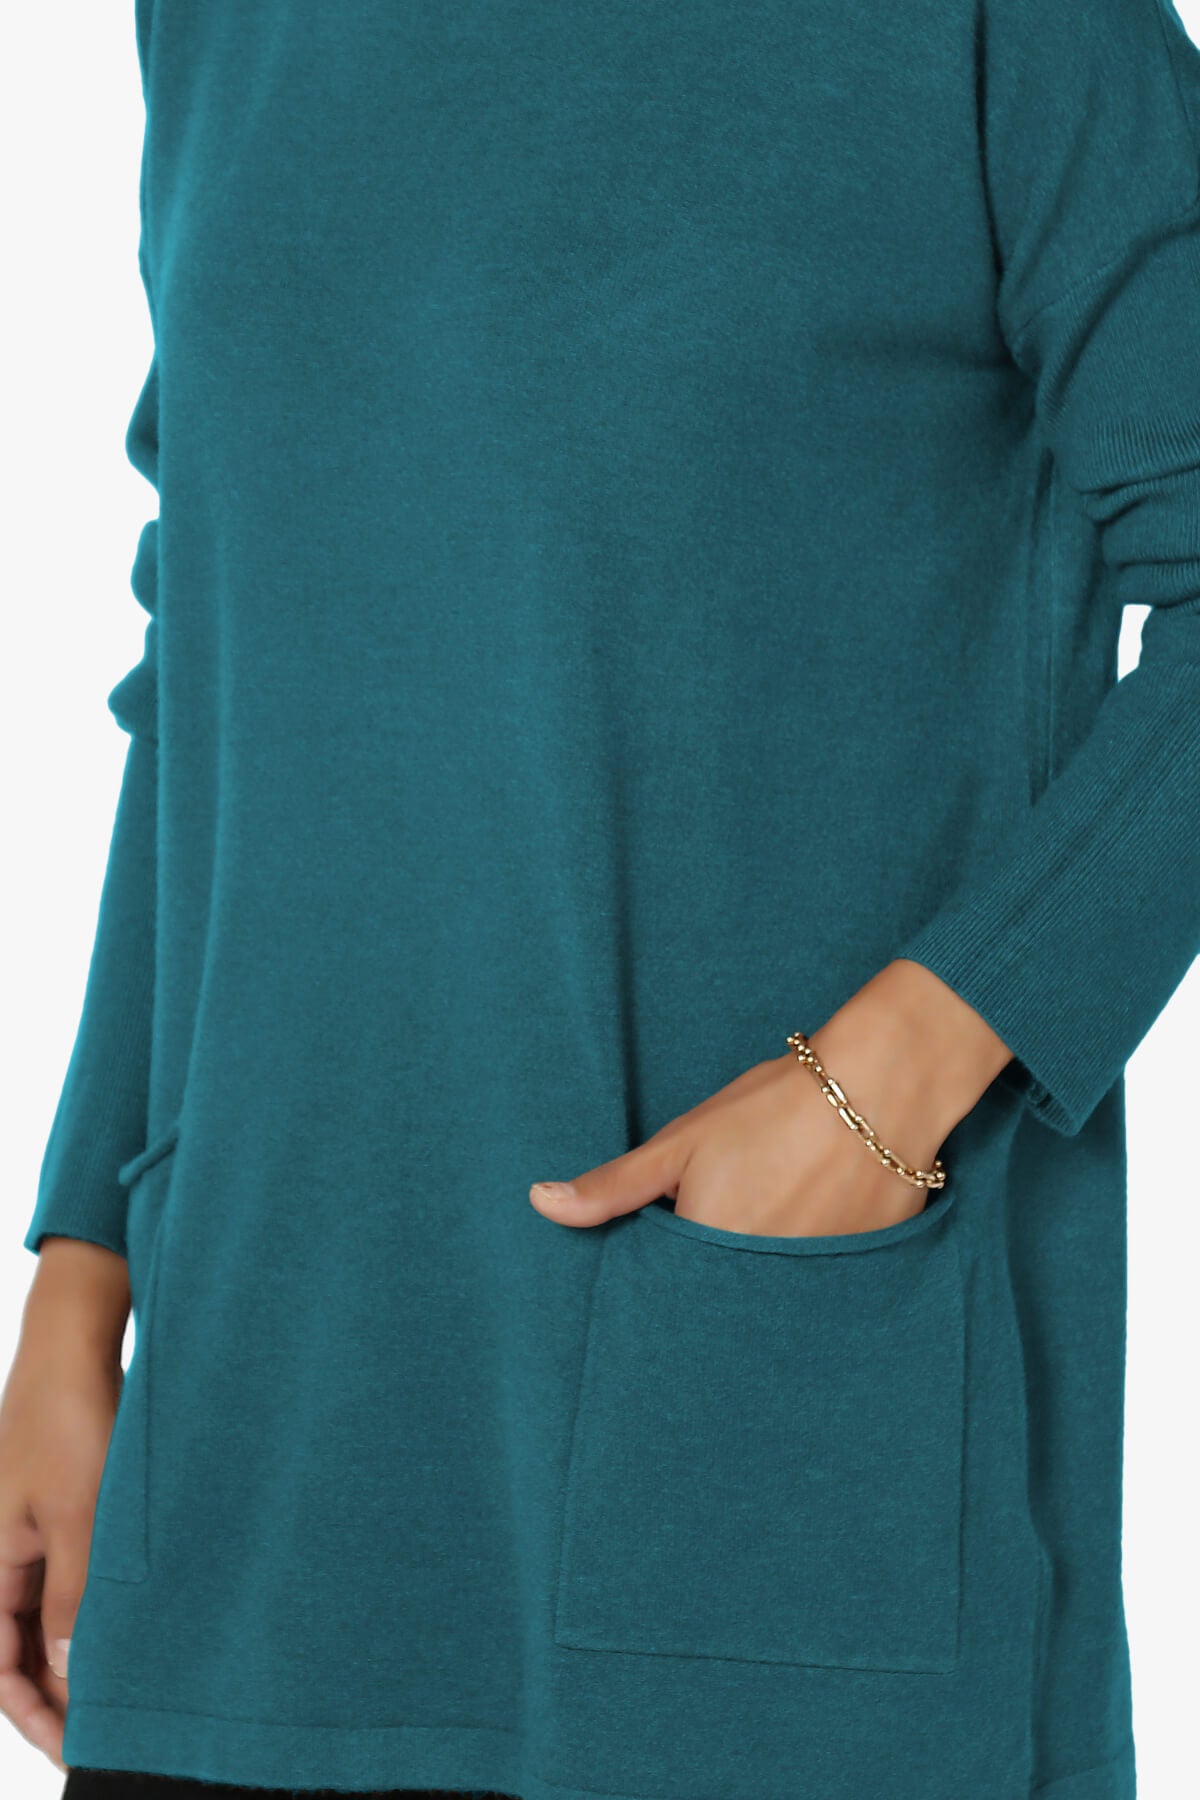 Load image into Gallery viewer, Brecken Pocket Long Sleeve Soft Knit Sweater Tunic OCEAN TEAL_5
